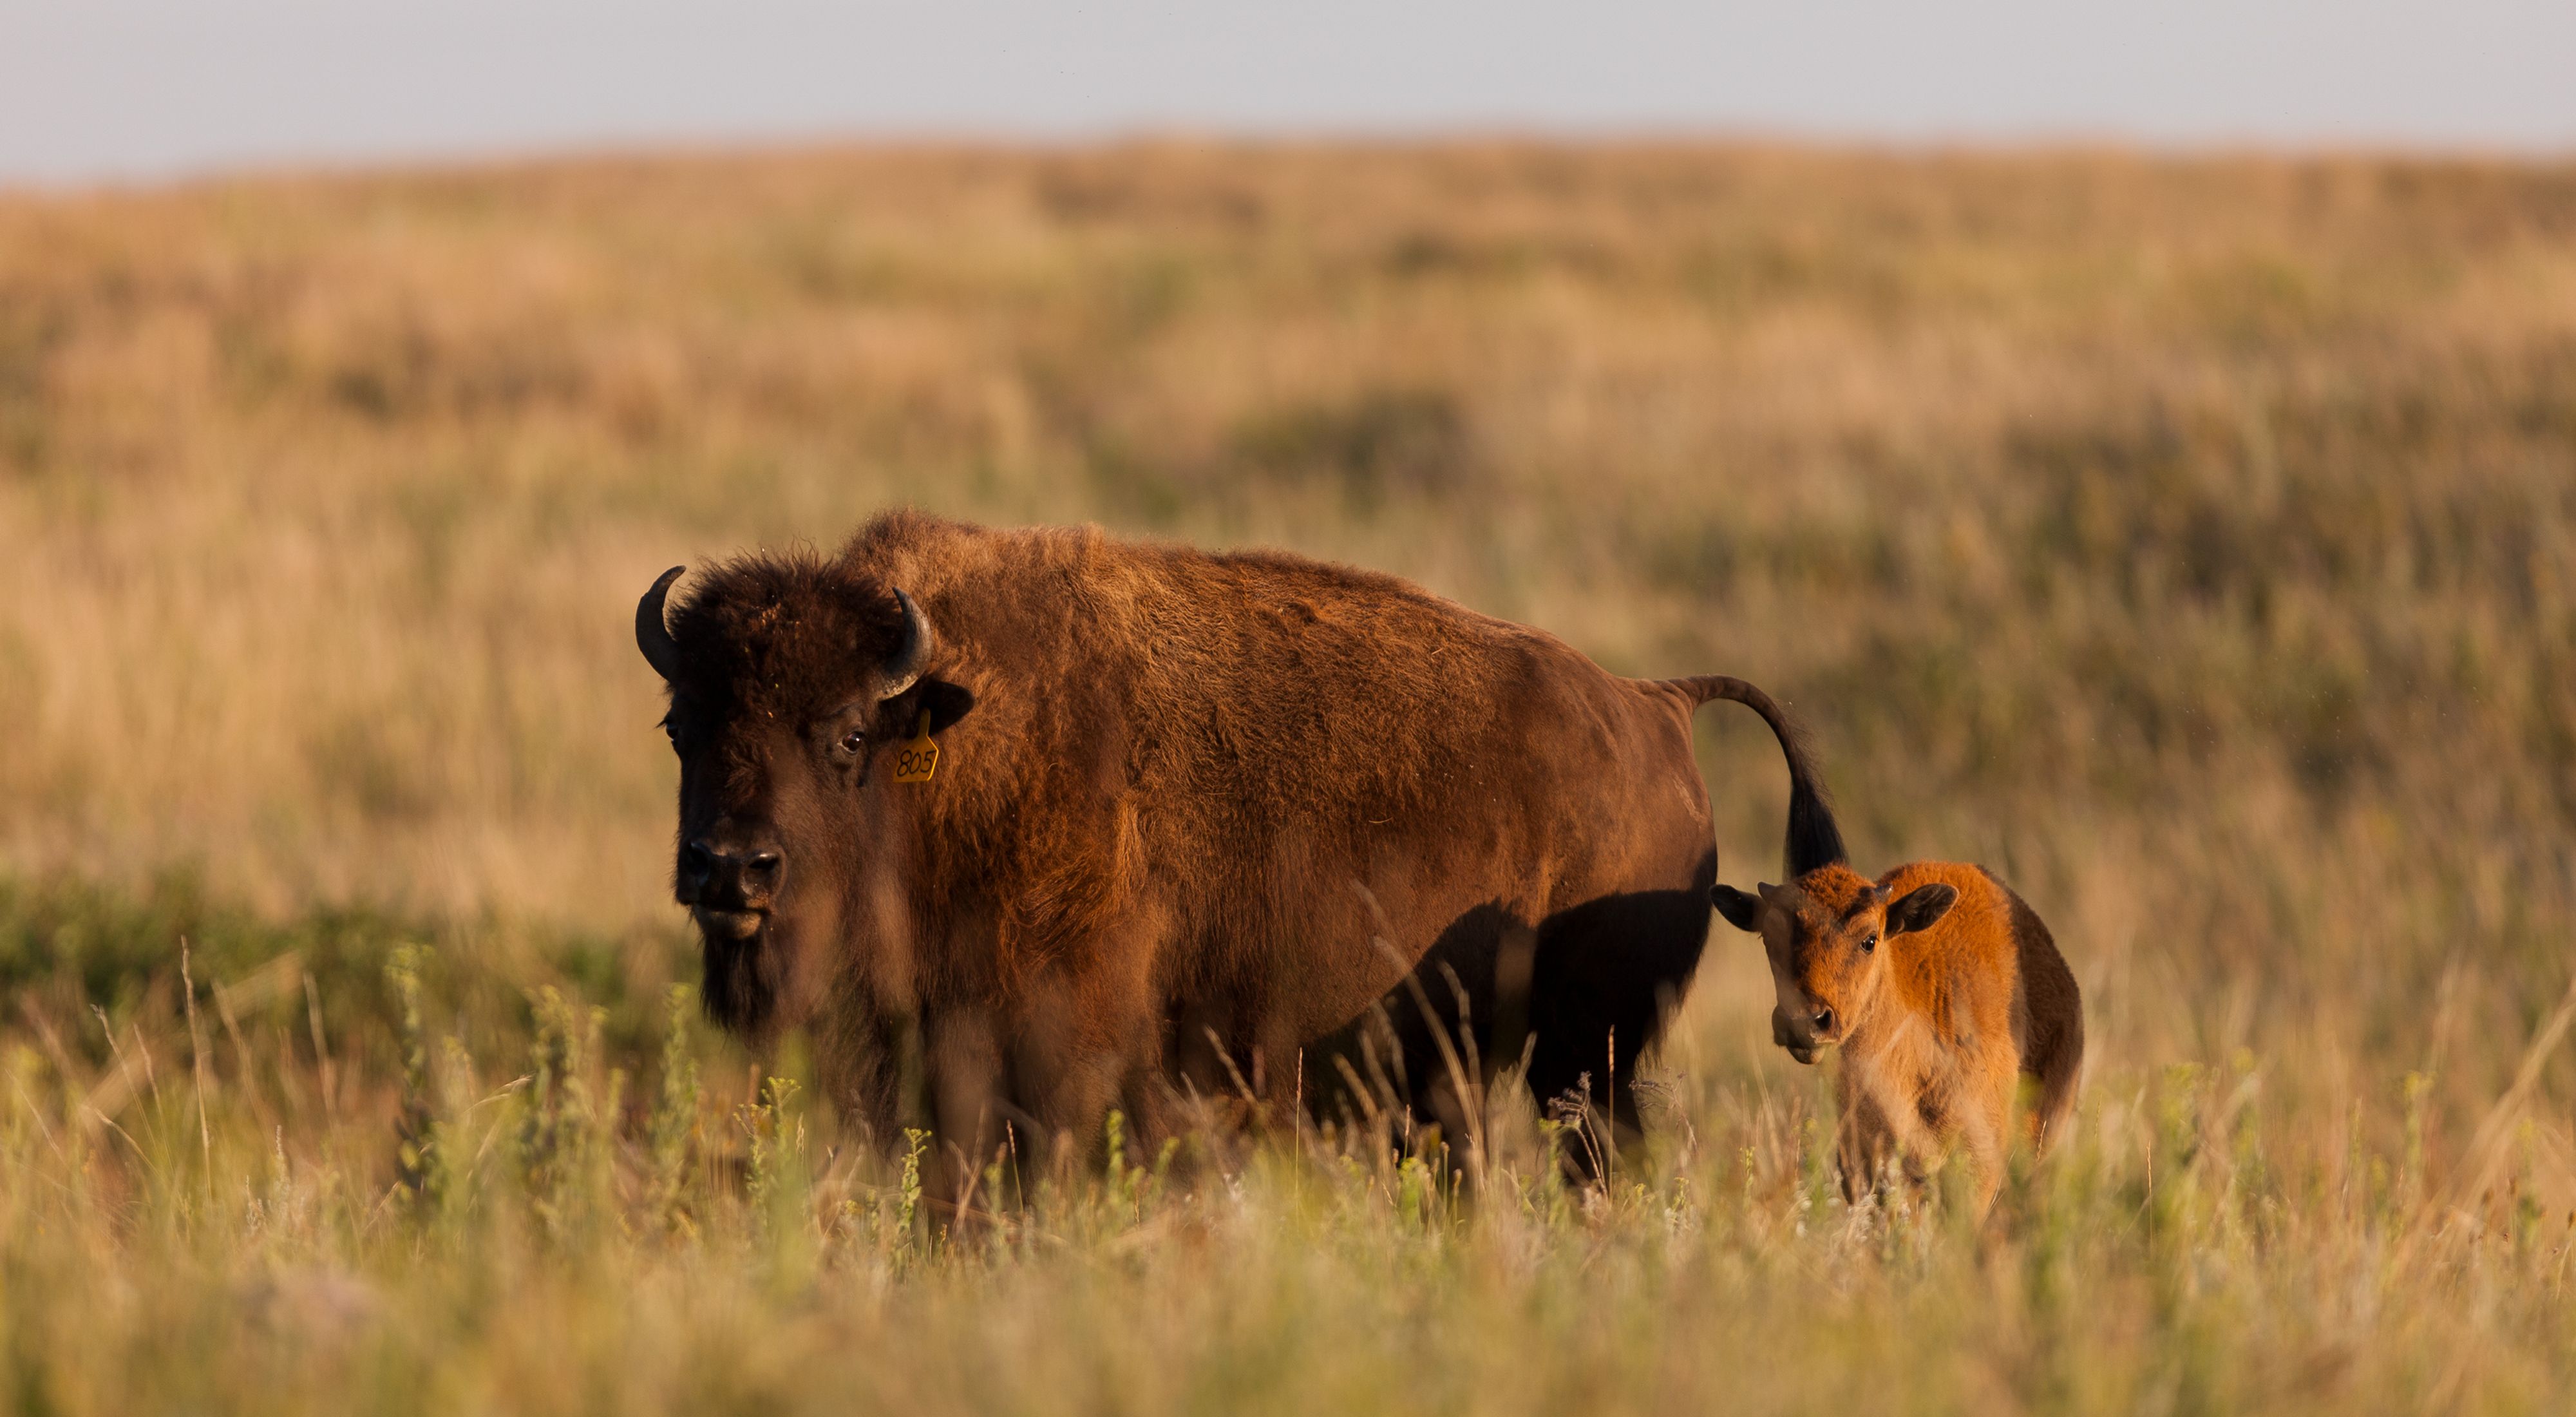 A bison calf with its mother at Cross Ranch preserve in North Dakota.